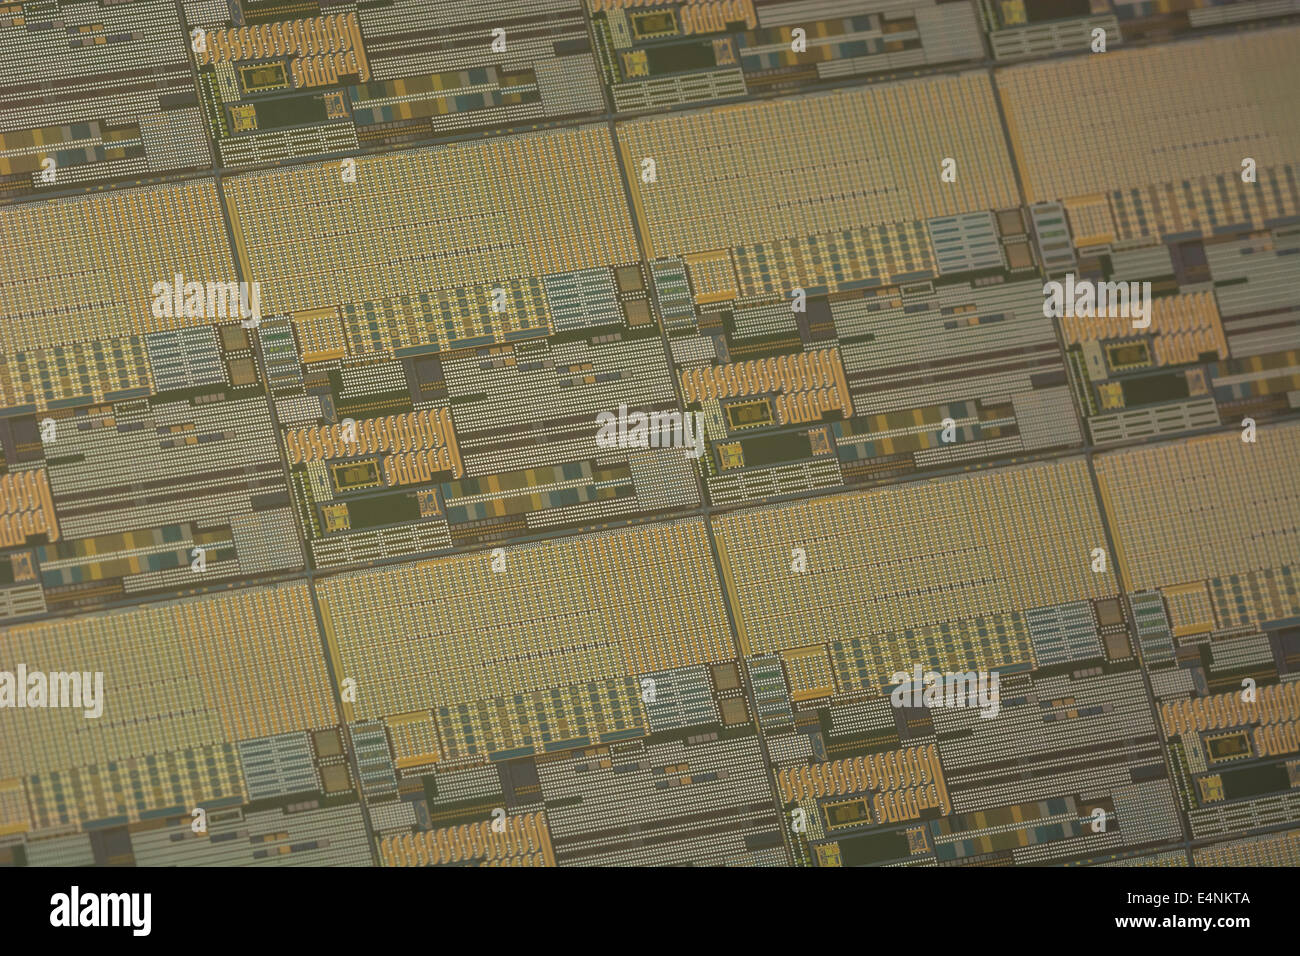 Macro-photo of microcircuit chips on silicon wafer. Digital technology concept, micro circuits, tiny concept, silicon chips, microchip shortage. Stock Photo